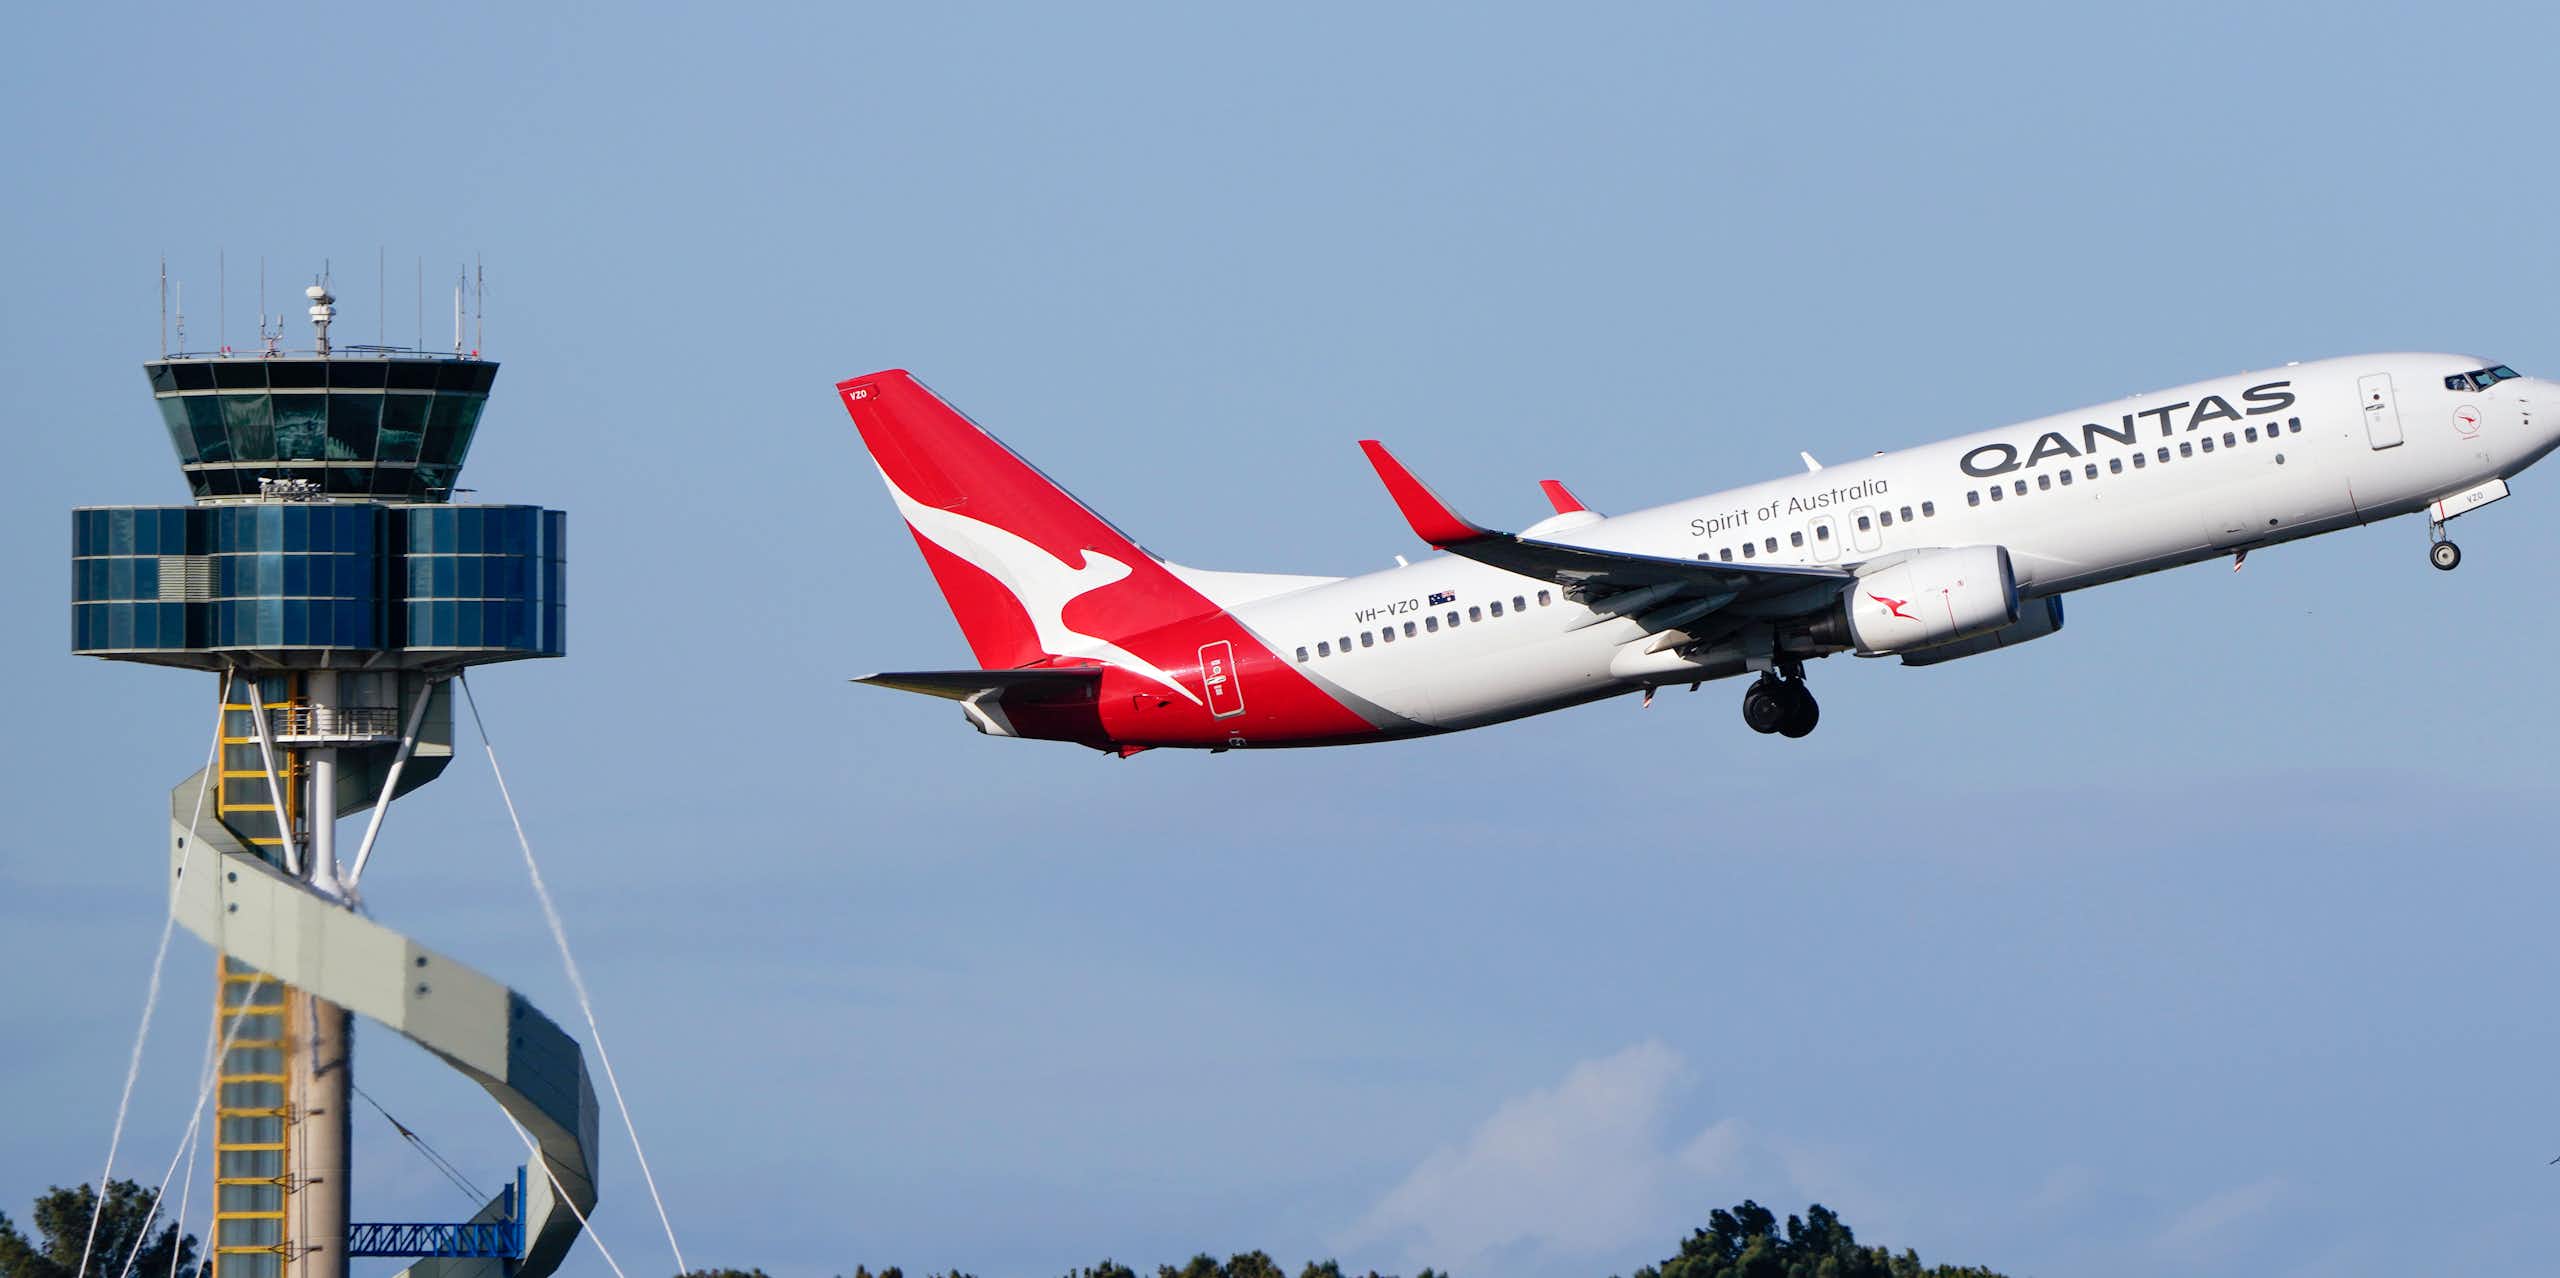 Qantas plane takes off from Sydney airport